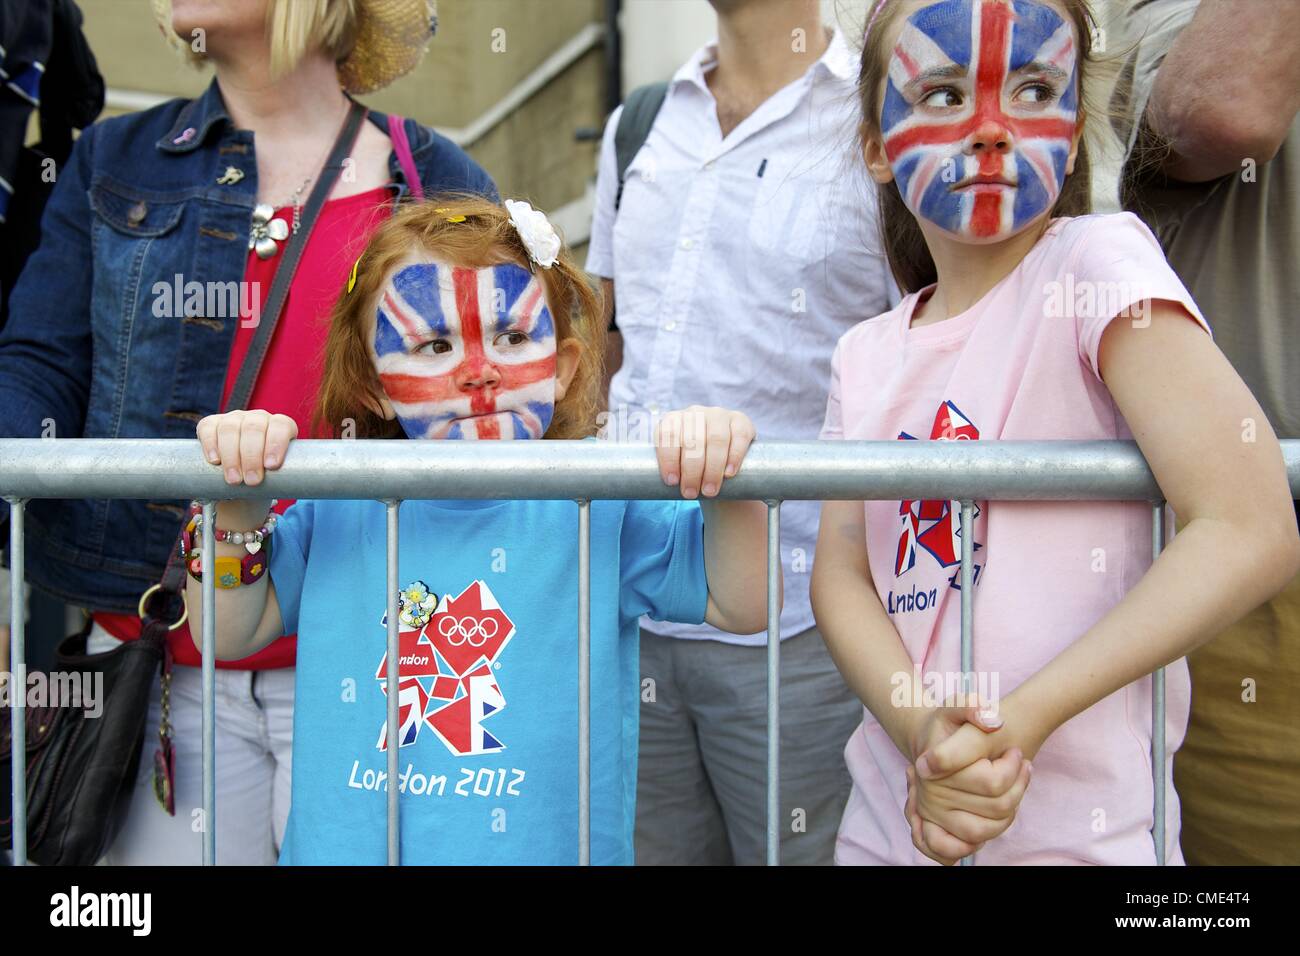 July 28, 2012 - London, England, UK - With faces painted as the Union Jack flag, sisters AMELIE, 4, and LAUREN CHANT, 6, await the arrival of the horses guard on Whitehall. (Credit Image: © Mark Makela/ZUMAPRESS.com) Stock Photo